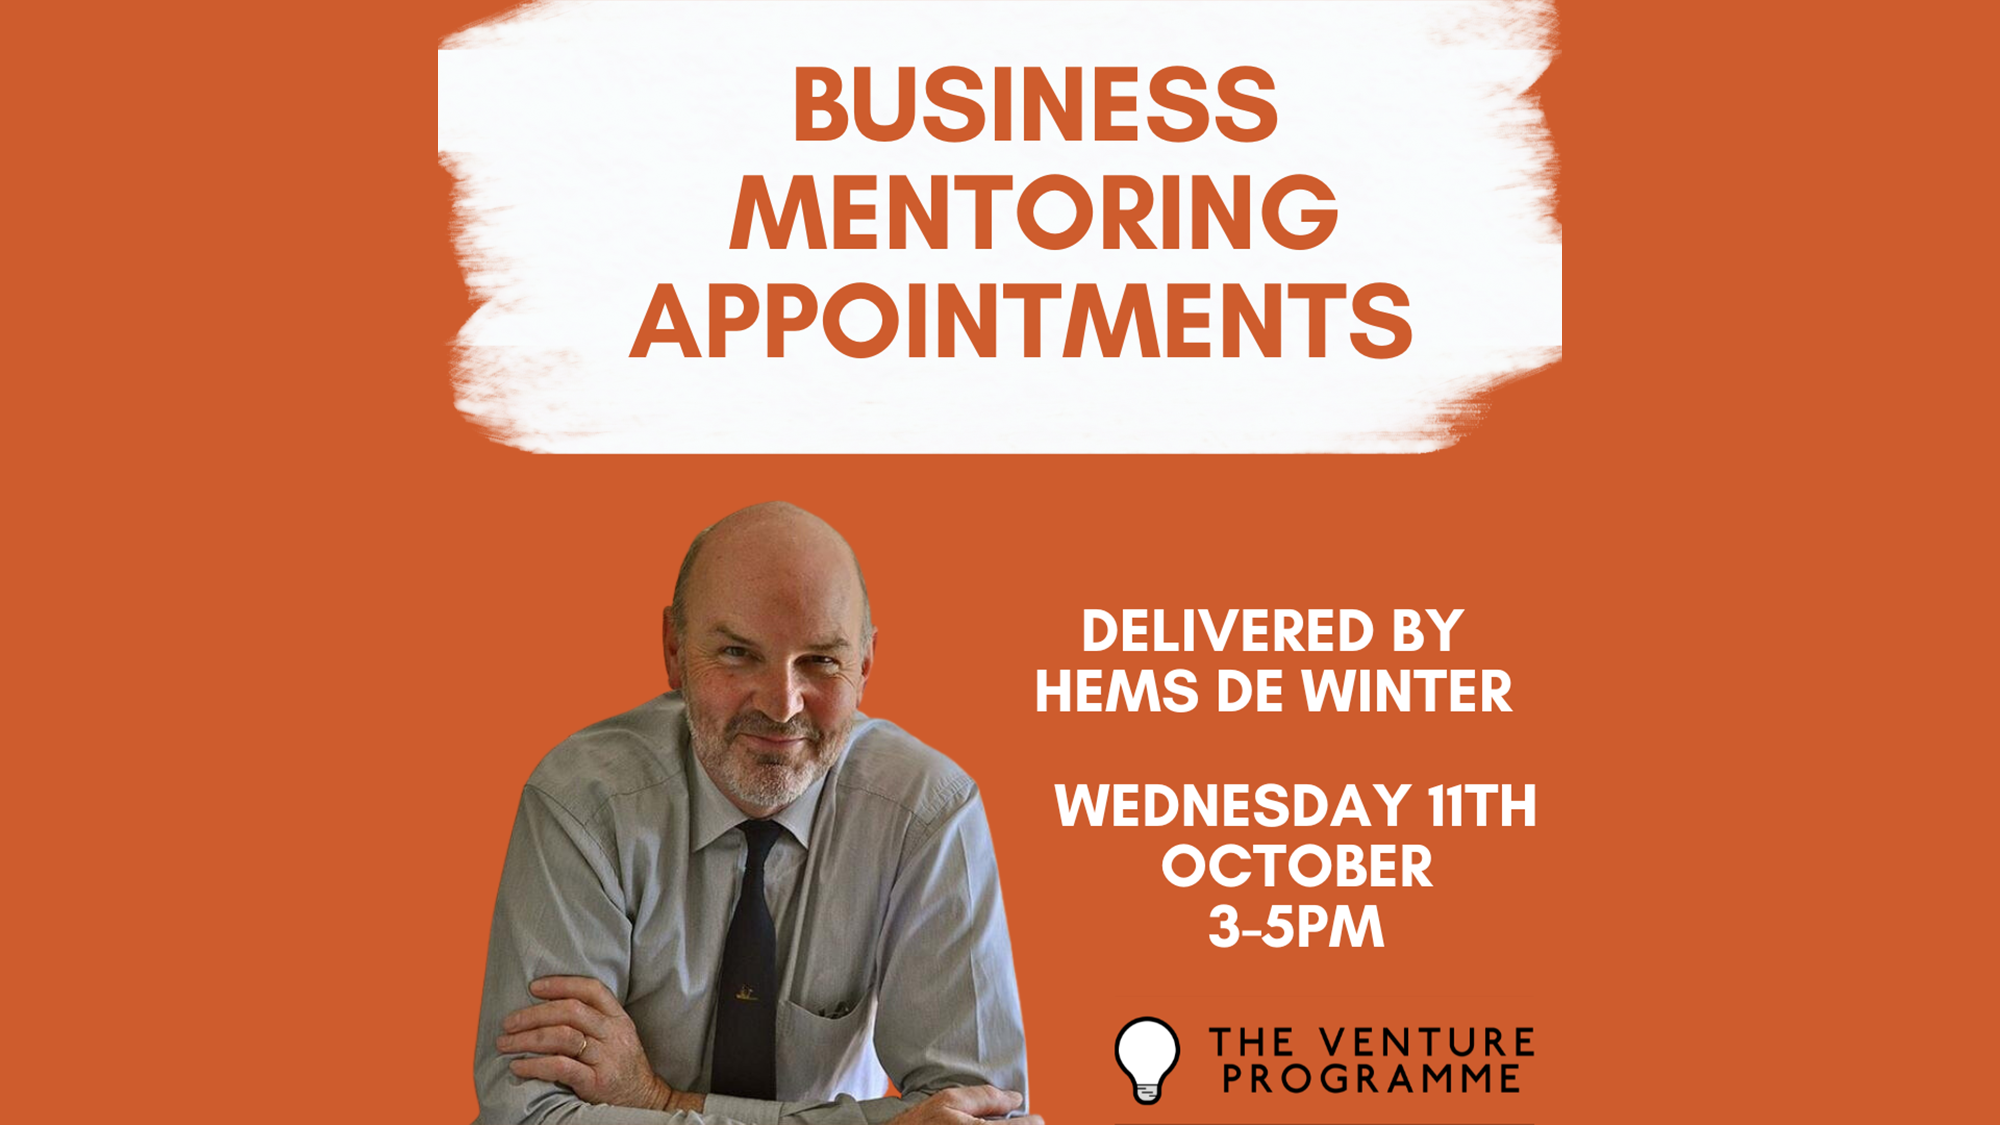 Venture Programme: Business Mentoring Appointments with Hems de Winter